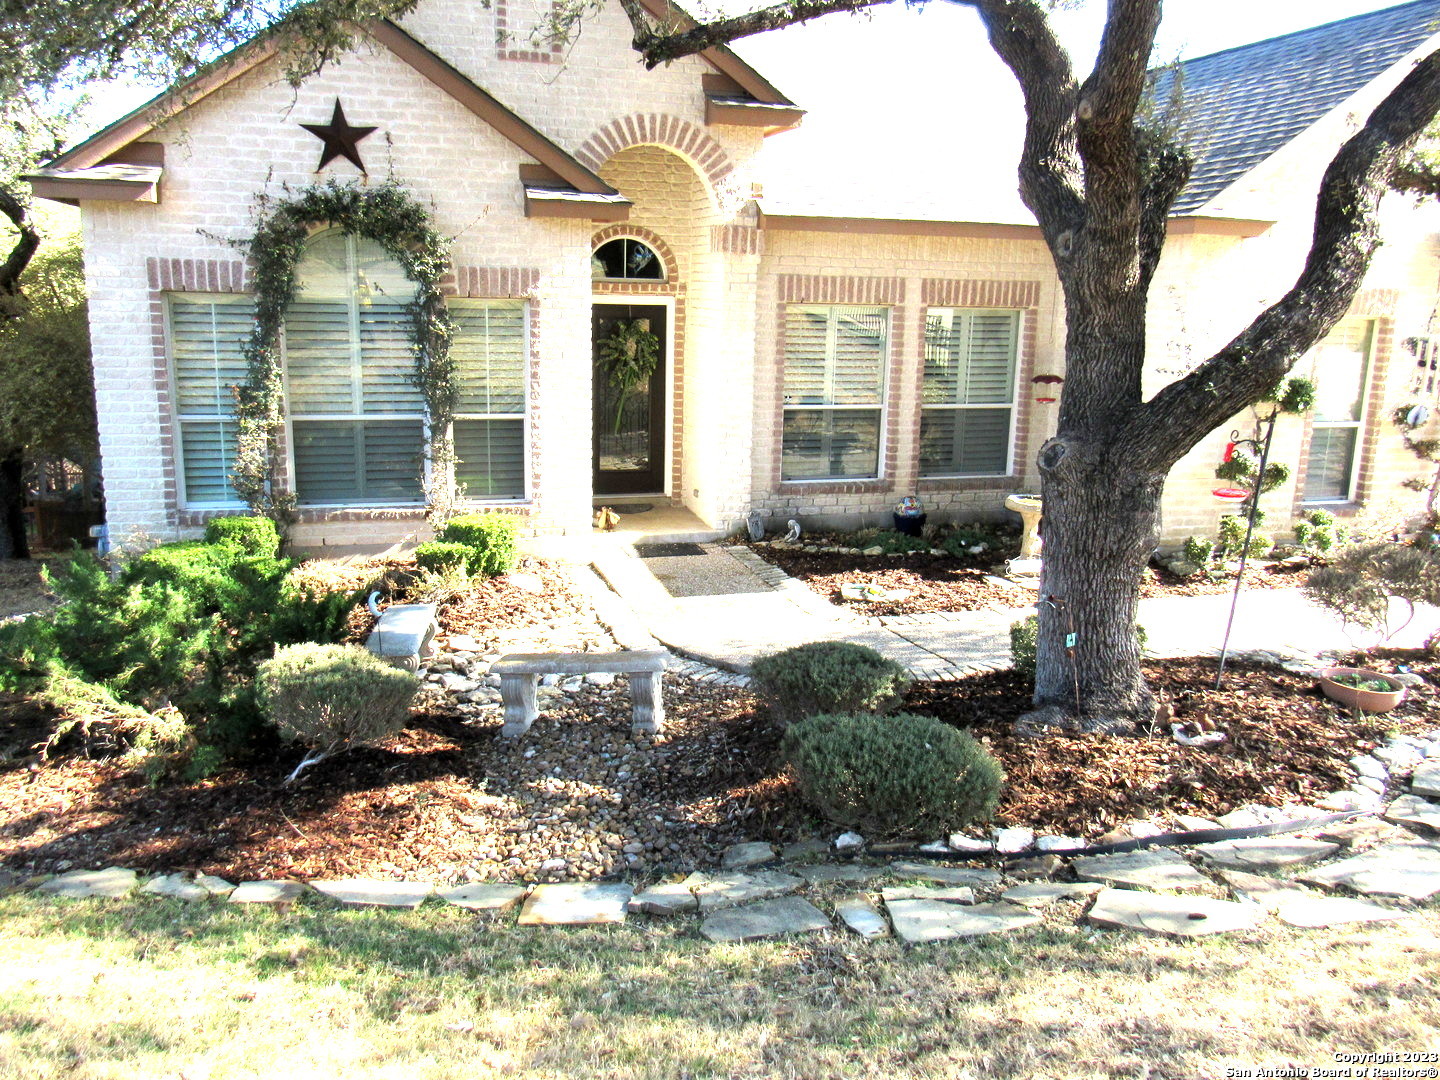 .64 of an acre with an additional green belt that gives a wonderful park setting, all inside of 1604!  Plenty of mature trees that compliment the custom decking for relaxation and entertainment.  The Leon Valley Hiking and Bike trails are walking distance from the properties back gate.  All conveniences and schools are close by, with Medical ctr, VA, UTSA locations, as well. The neighborhood has only 1 entrance/exit eliminating traffic flow.  Some of the features are fully fenced yard, landscaped with concrete walkways, 4 sides brick, 10 ft ceilings throughout, fireplace, soft water system, irrigation, custom plantation shudders every window, security system, metal keyless front door, ring doorbell, wood/tile flooring - no carpet, 2 sheds (garden, utility) Bright updated kitchen with cabinets, upgrade lighting with solar, touch faucet, plenty of additional granite counter seating for gatherings.  Study has closet and can be used as a bedroom.  Come and enjoy family living in this great home.